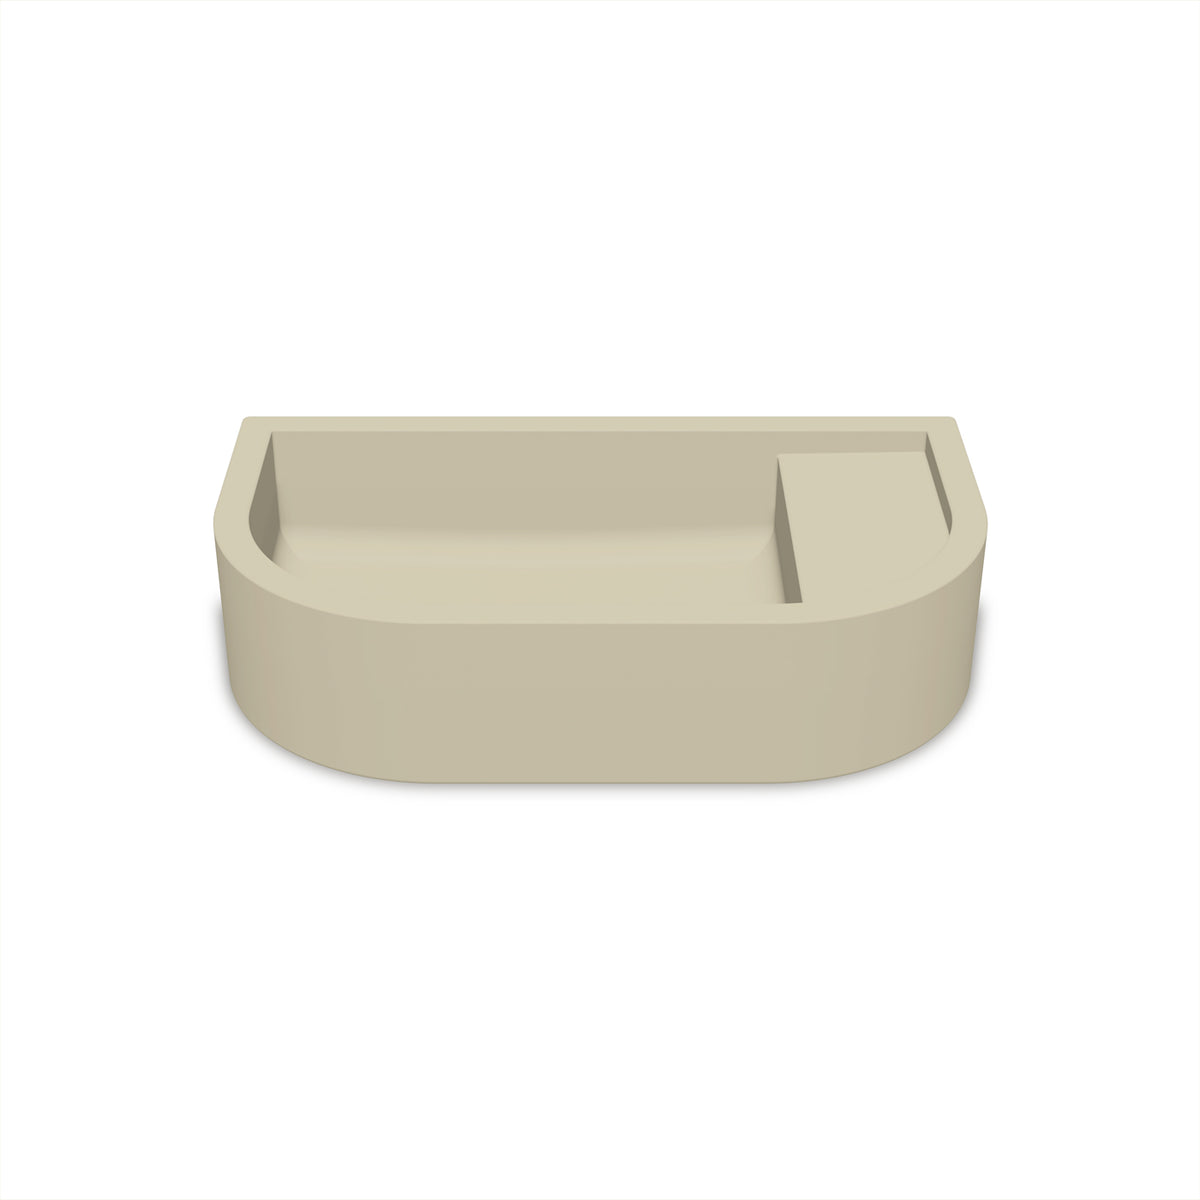 Loop 02 Basin - Overflow - Surface Mount (Sand,No Tap Hole,Brass)